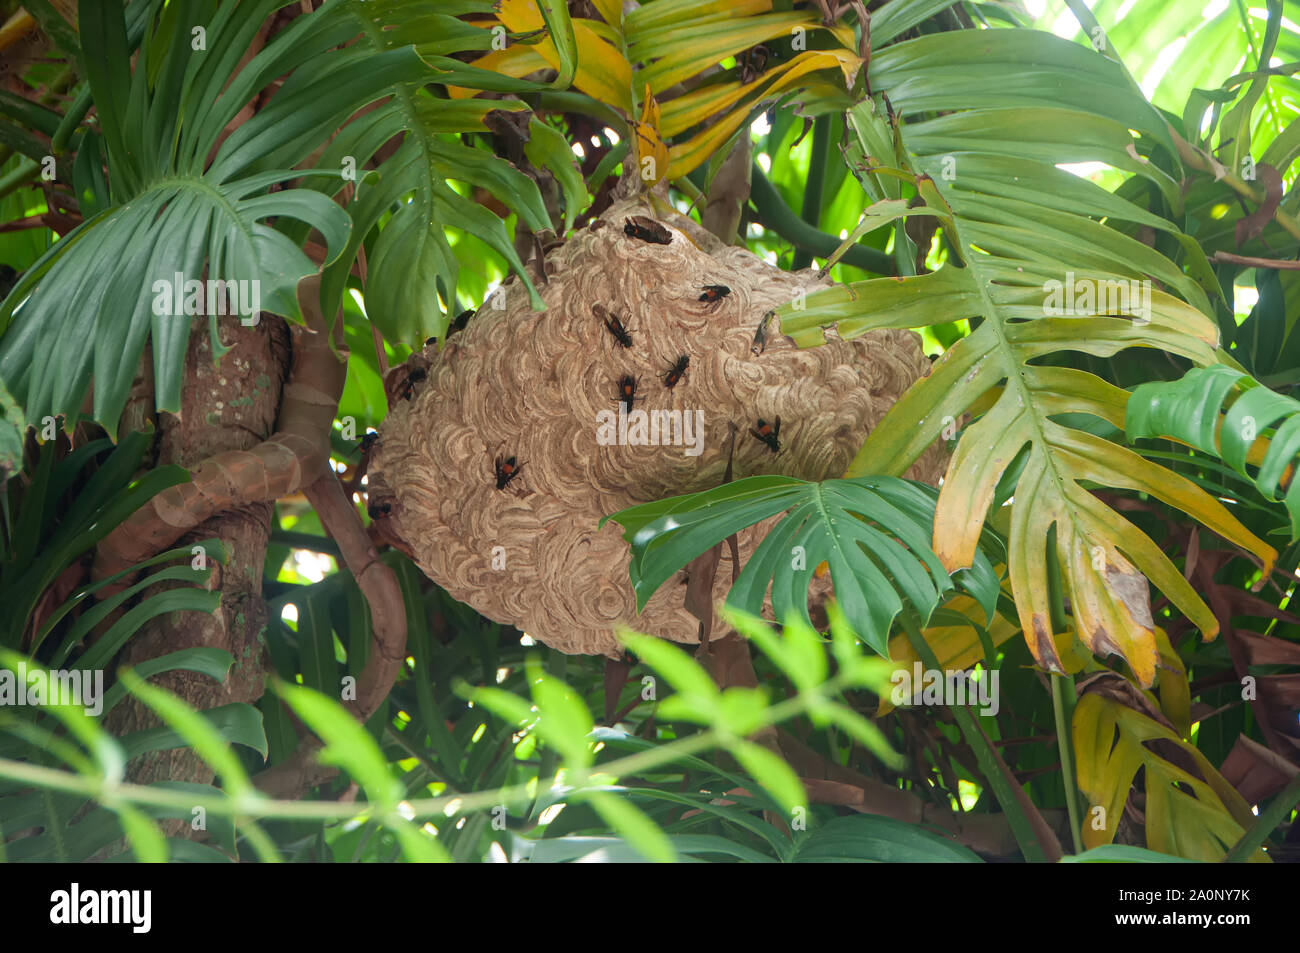 Large nest of wasps hangs over on a tree branch Stock Photo